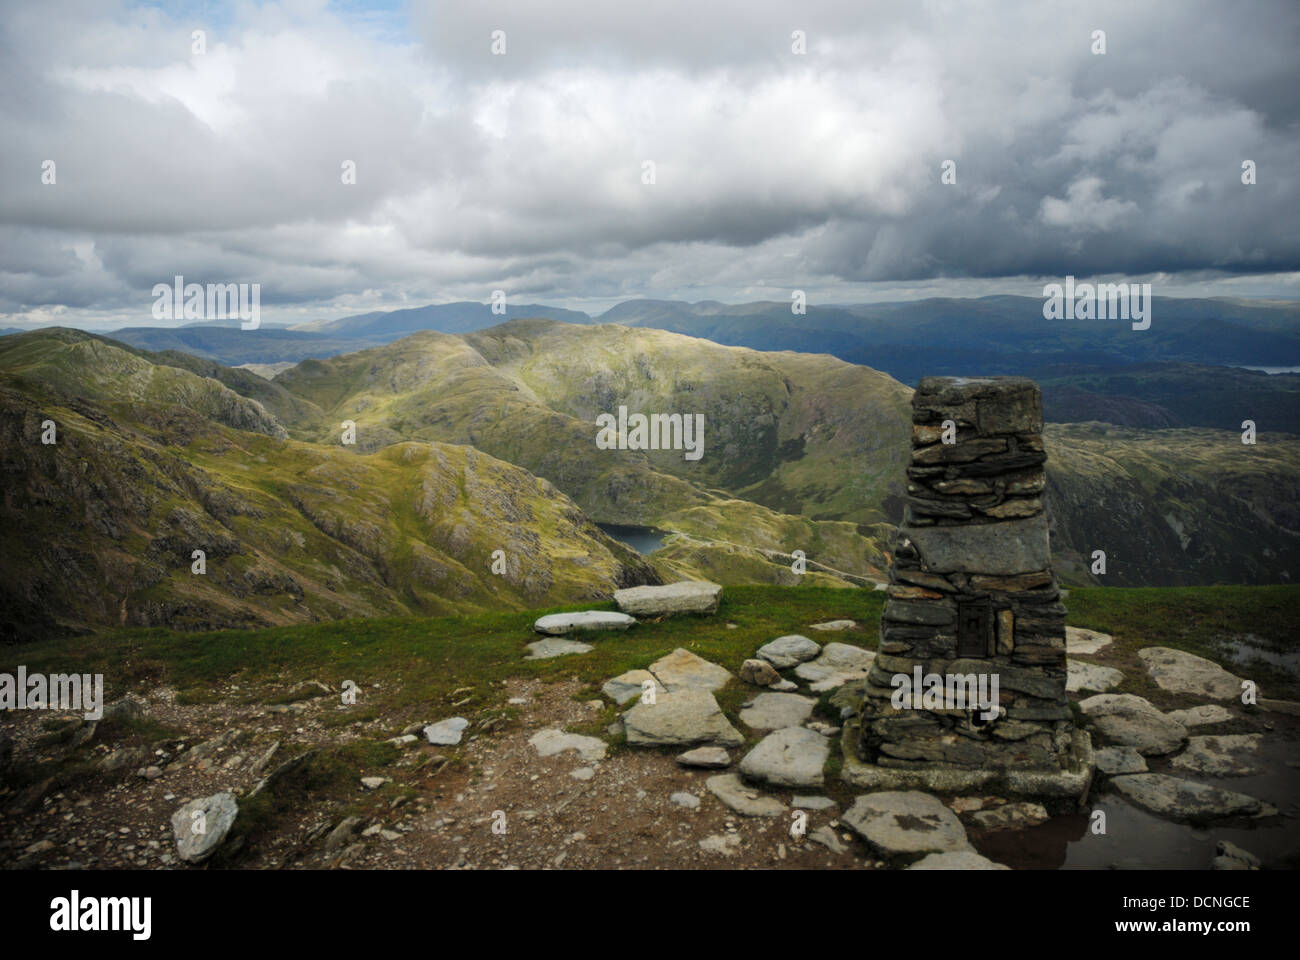 Trig Point,Old man Coniston,Mountain,The Lake District National Park,UK Stock Photo